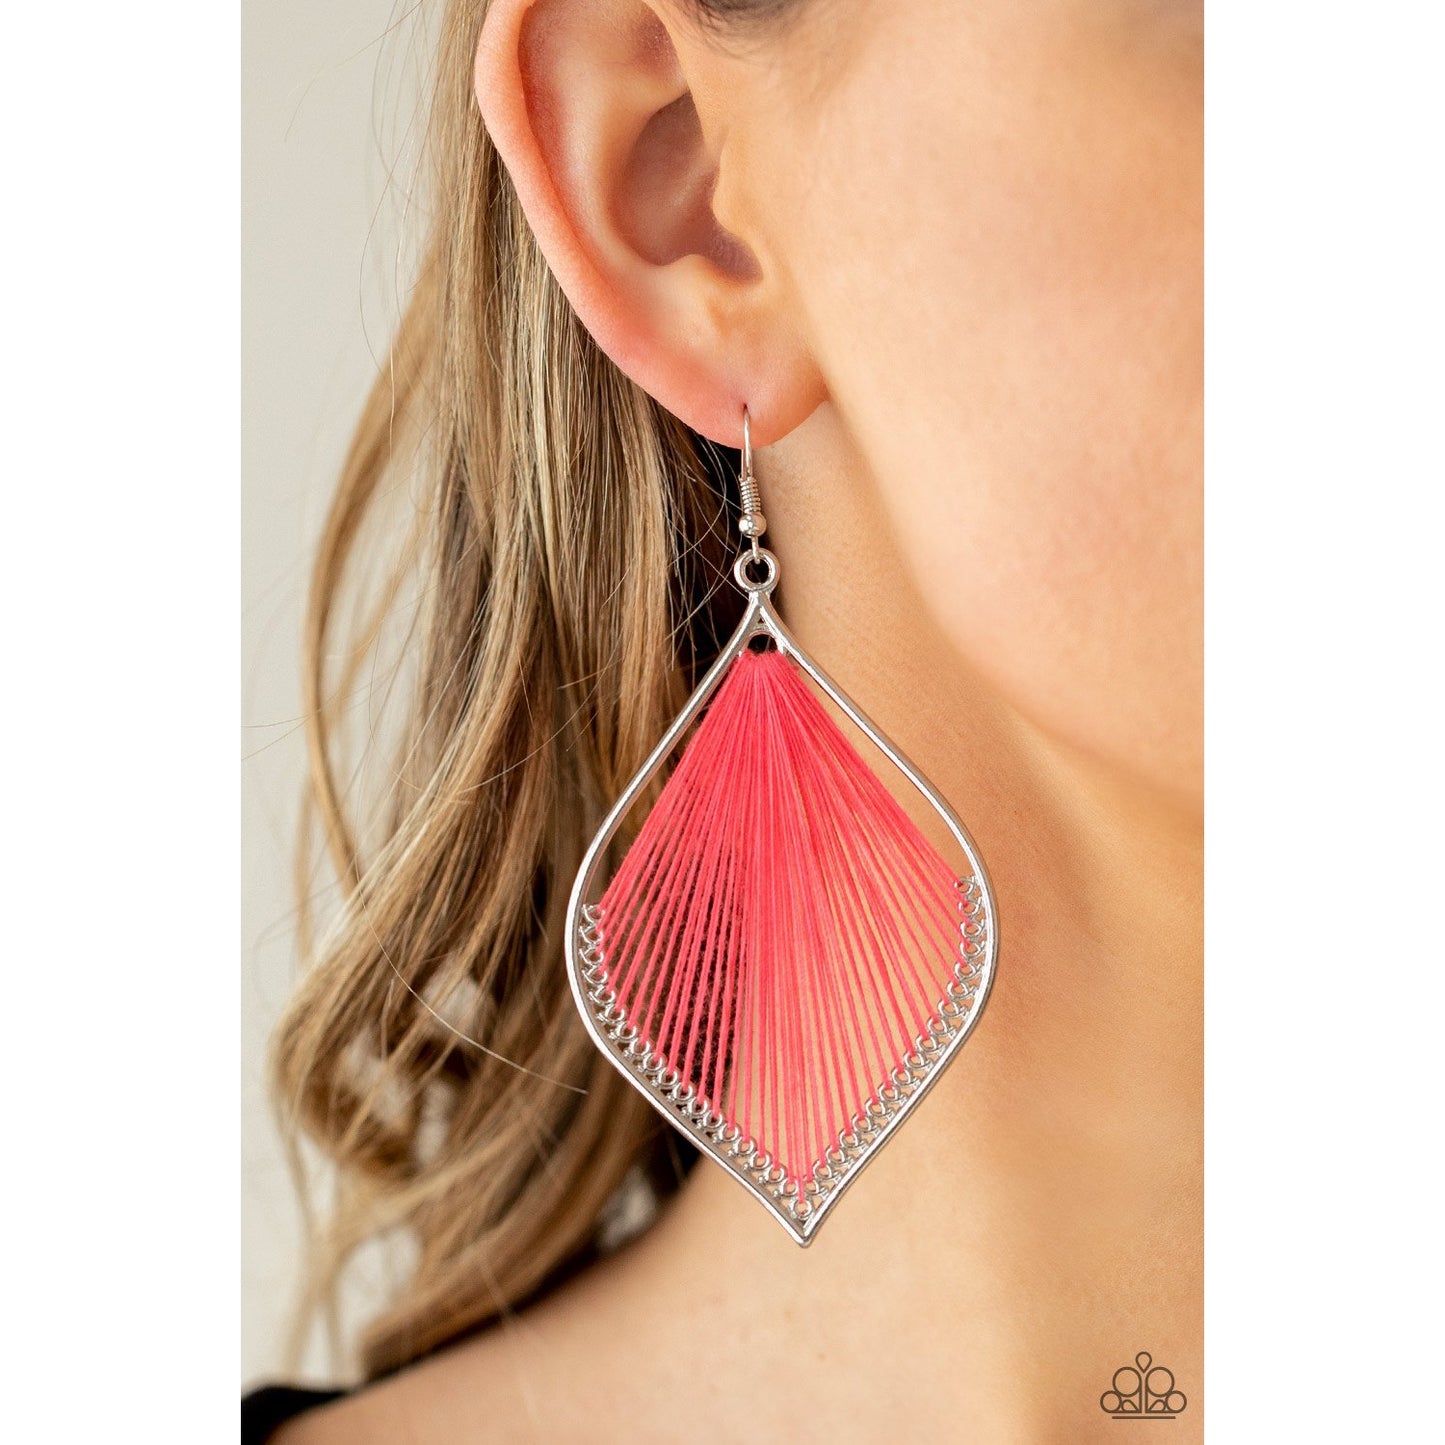 String Theory - Pink Earrings - Paparazzi Accessories - GlaMarous Titi Jewels